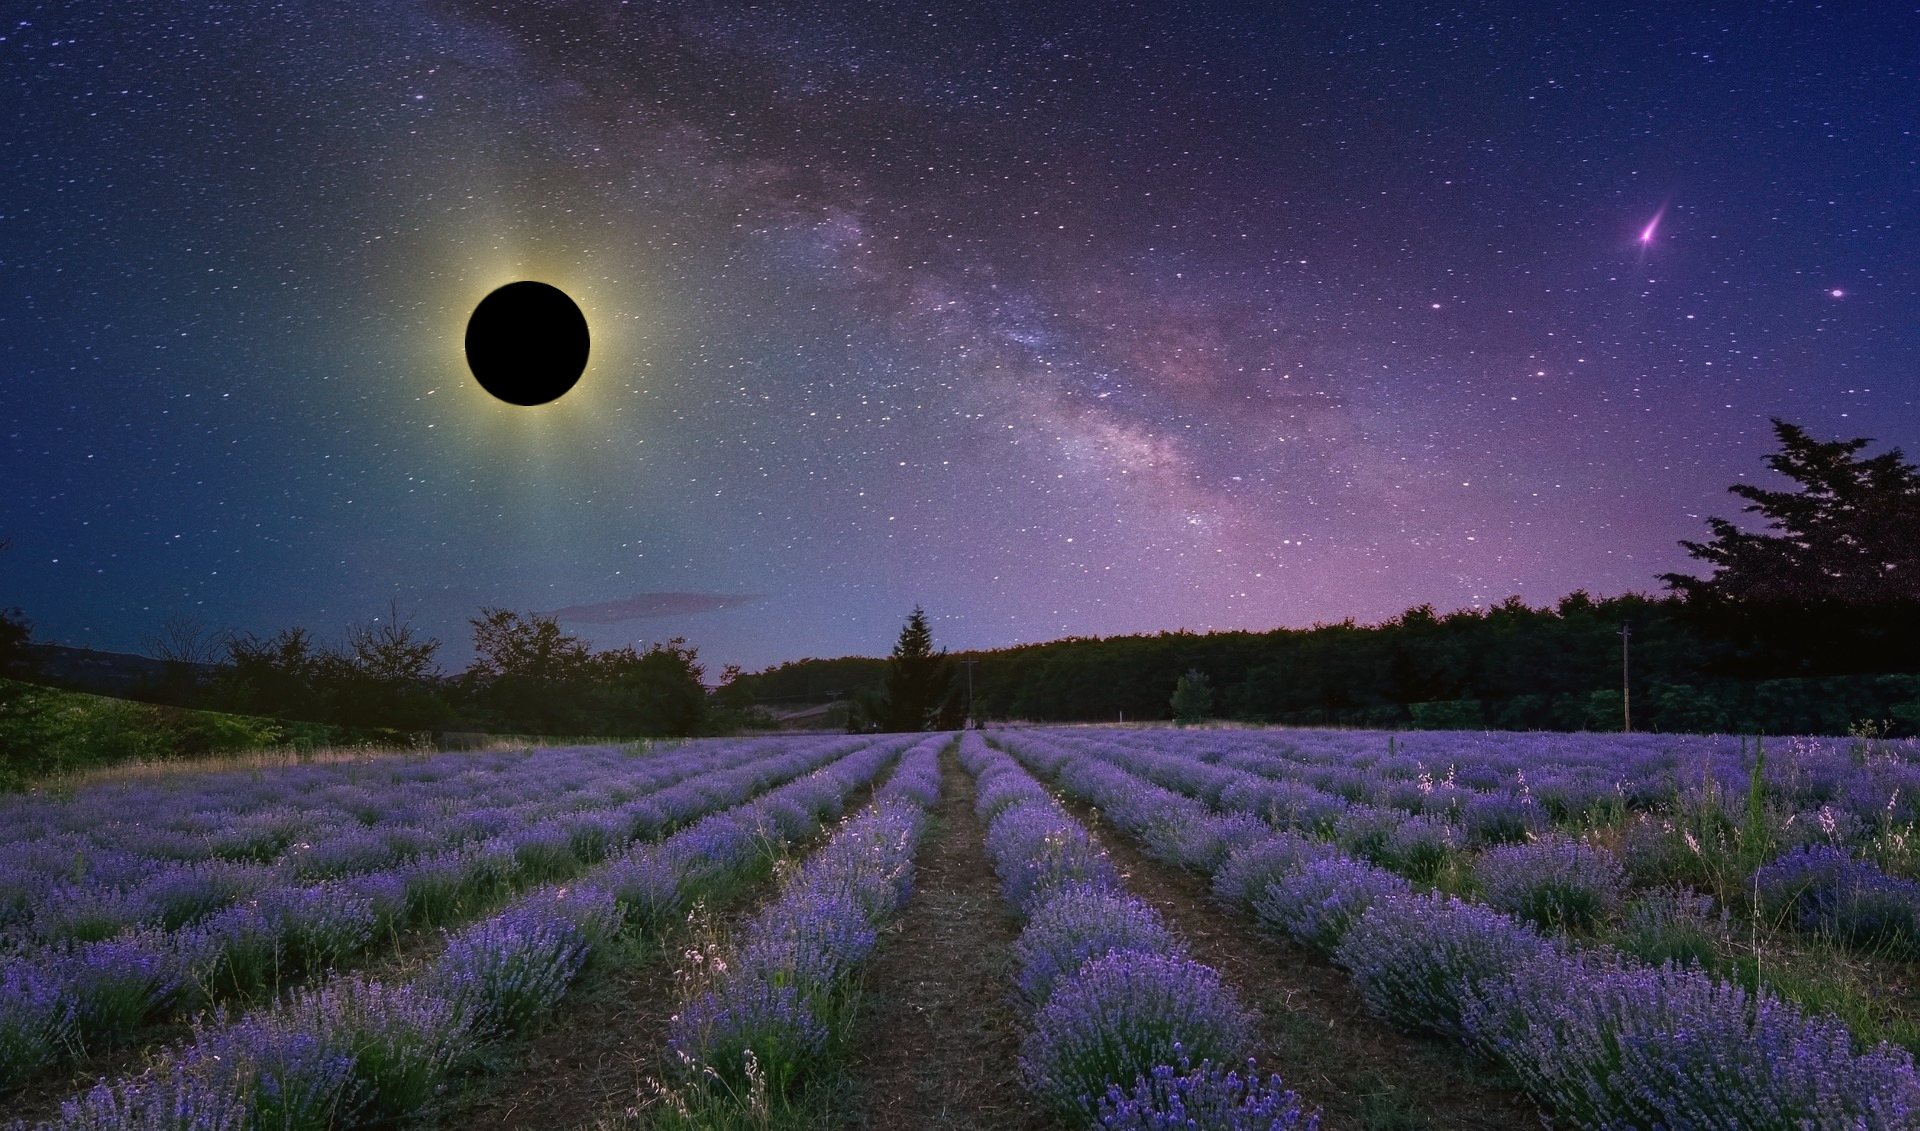 Violet hued skies darkened by the Solar Eclipse reveal the splendor of The Milky Way Galaxy over a field of beautiful blooming Lavender.